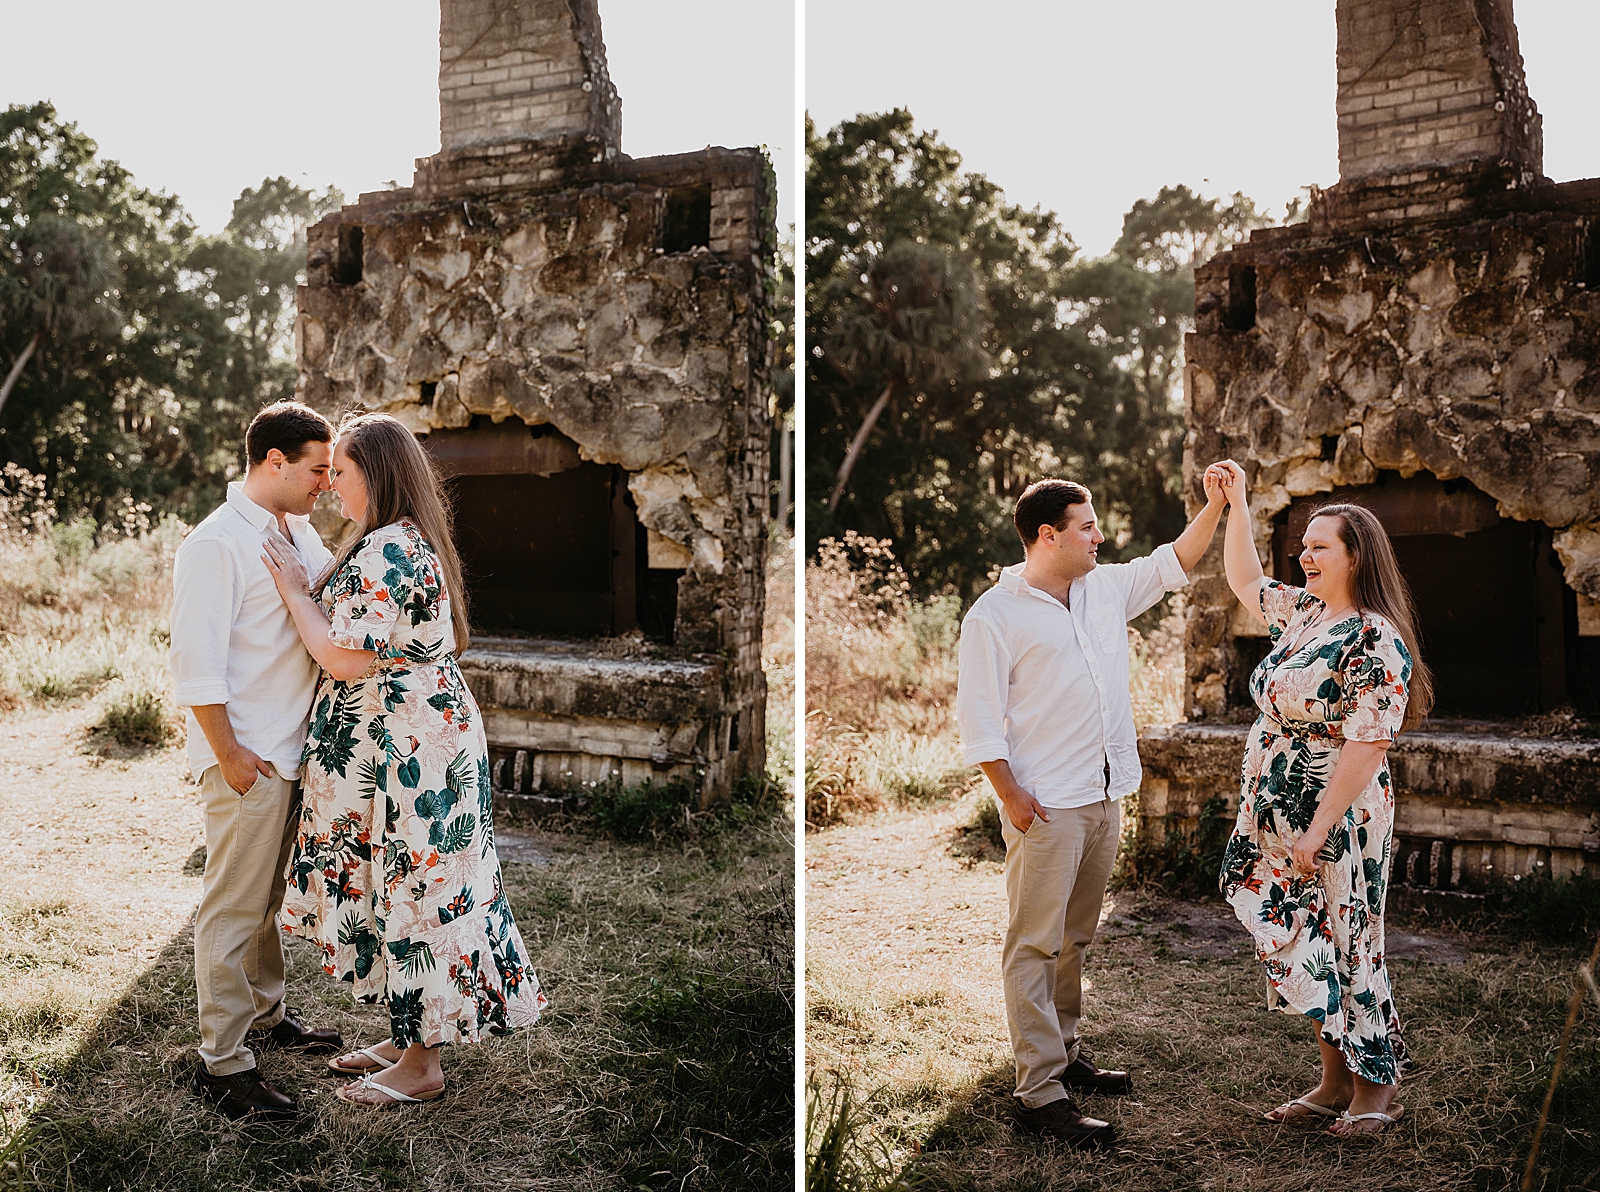 Couple nuzzling against each other and pirouetting by chimney ruins Riverbend Park Engagement Photography captured by South Florida Engagement Photographer Krystal Capone Photography 